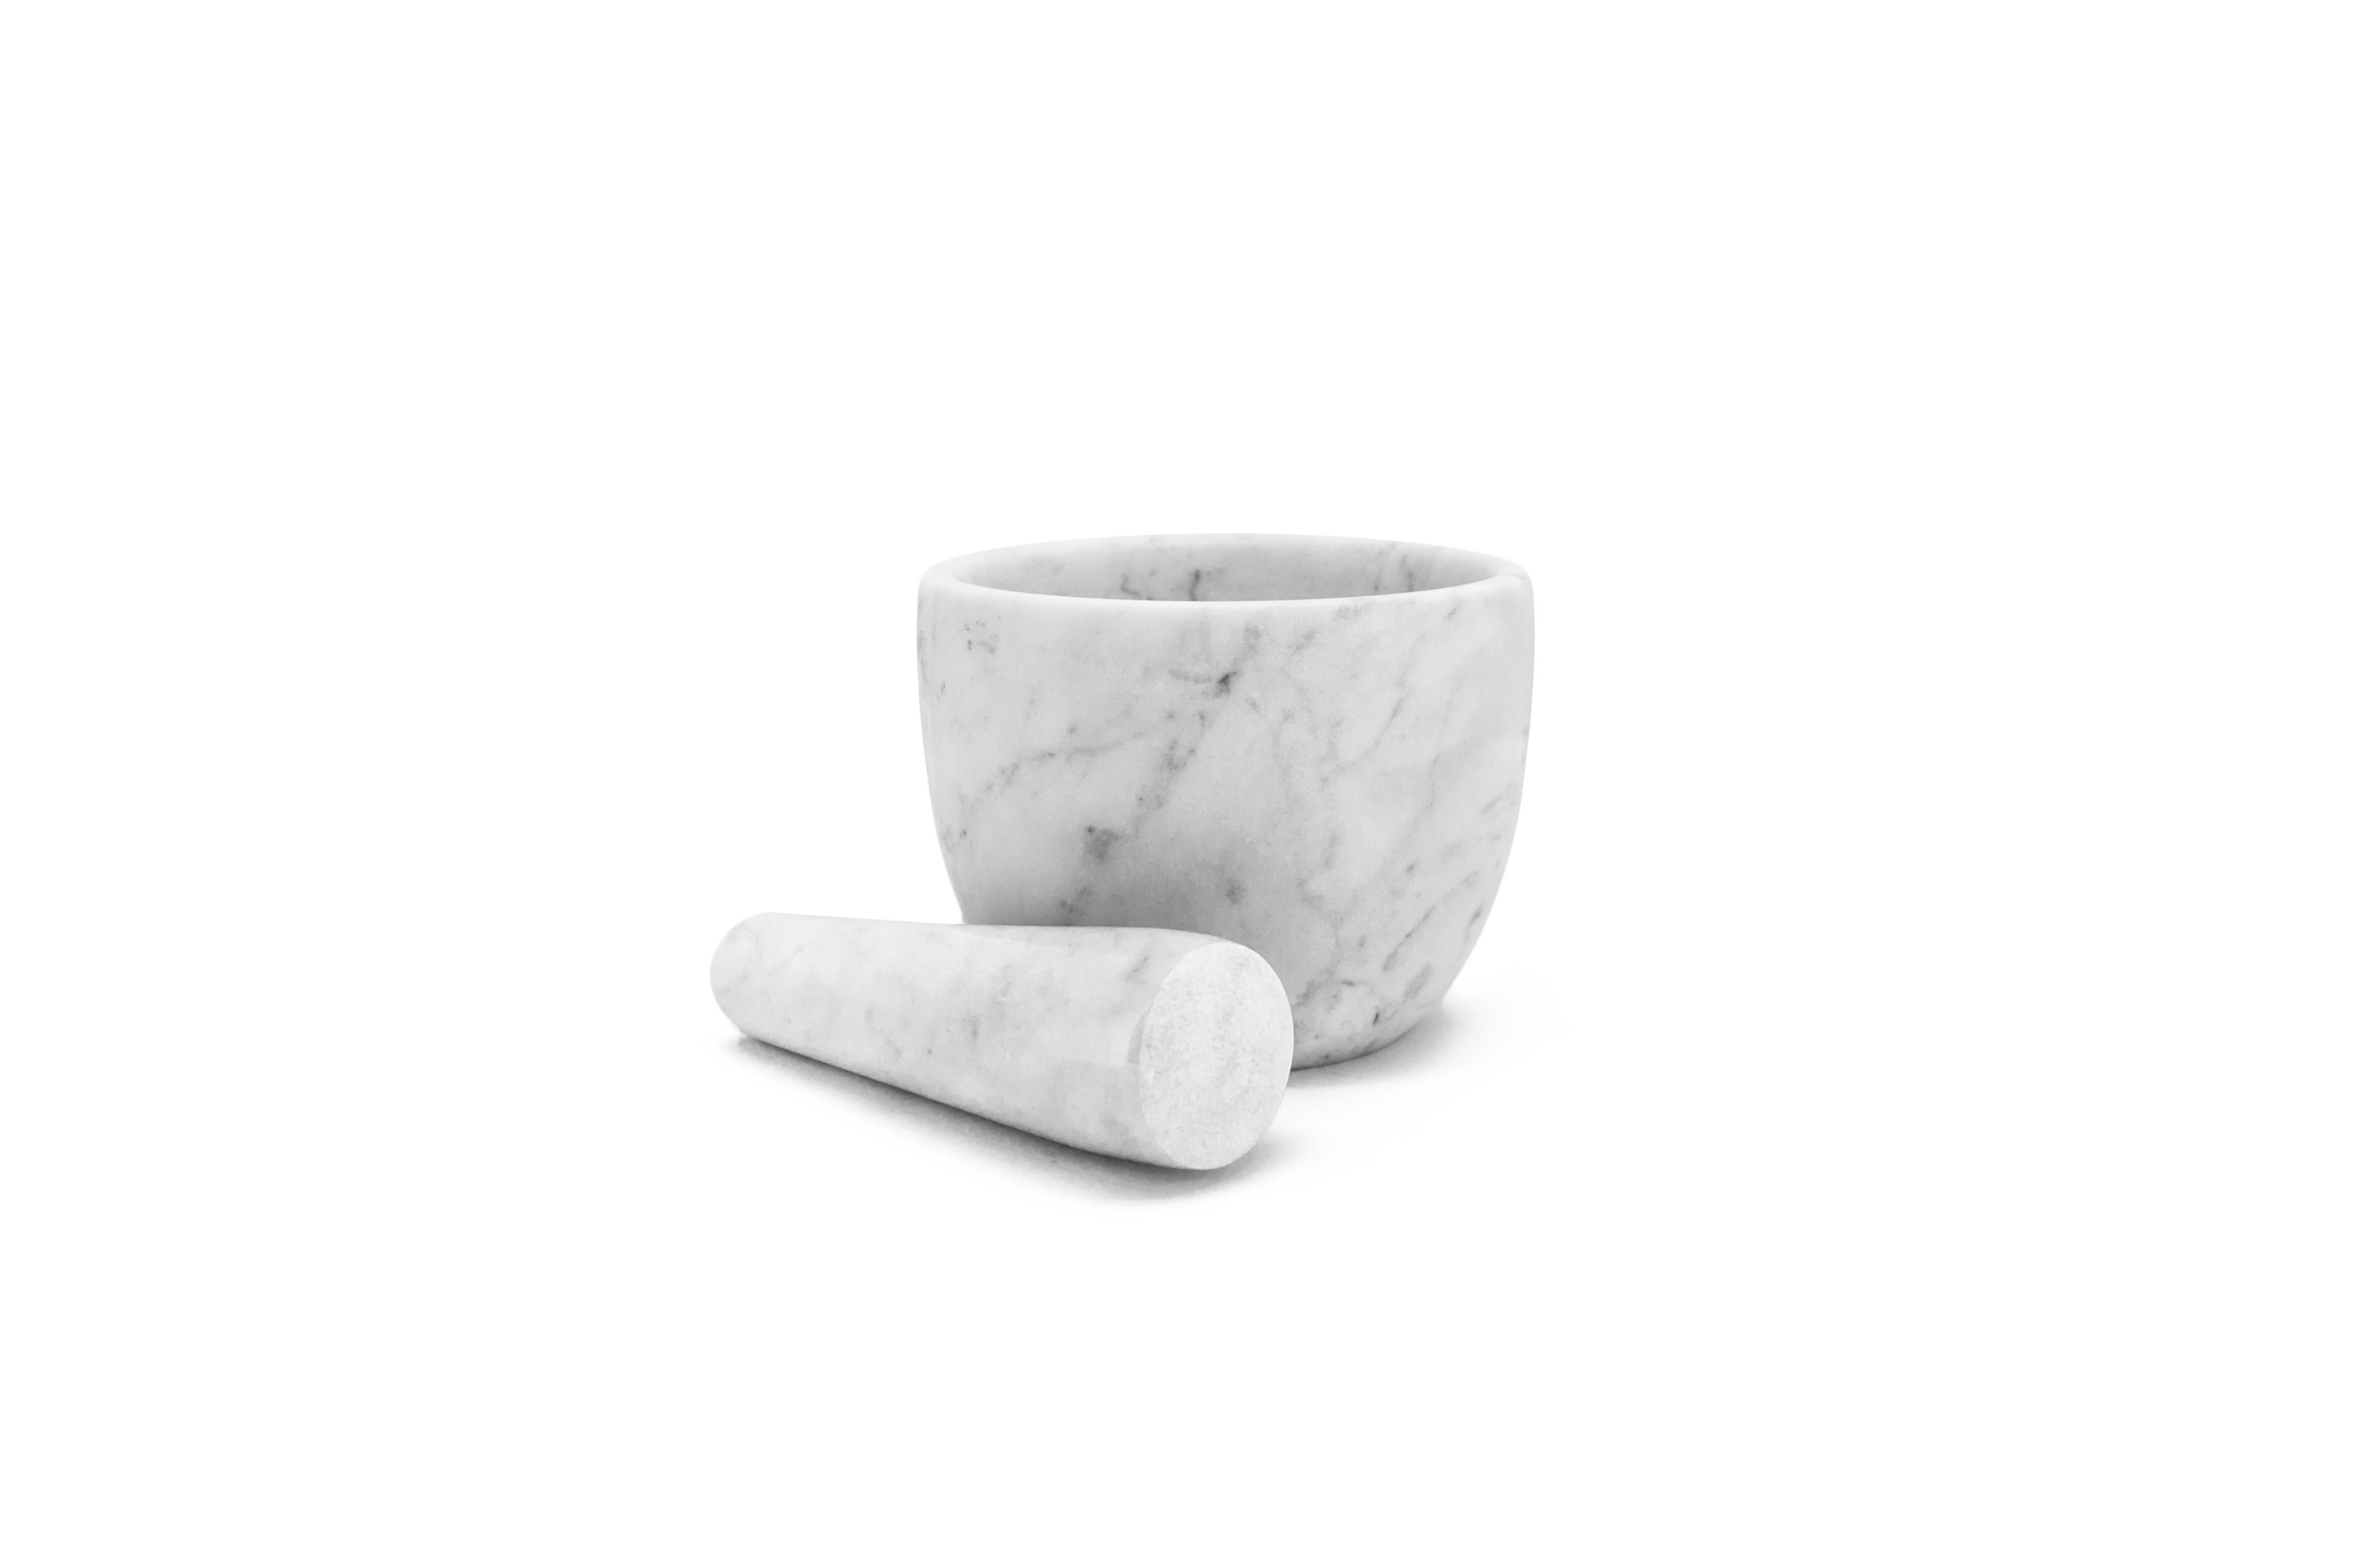 Small white Carrara marble mortar and pestle. 

Size of the mortar: diameter 12 cm x height 9; size pf the pestle: diameter 3.5 cm x 12.5 cm length.

The product cannot be washed in dishwasher but needs to be cleaned with water or Marseille